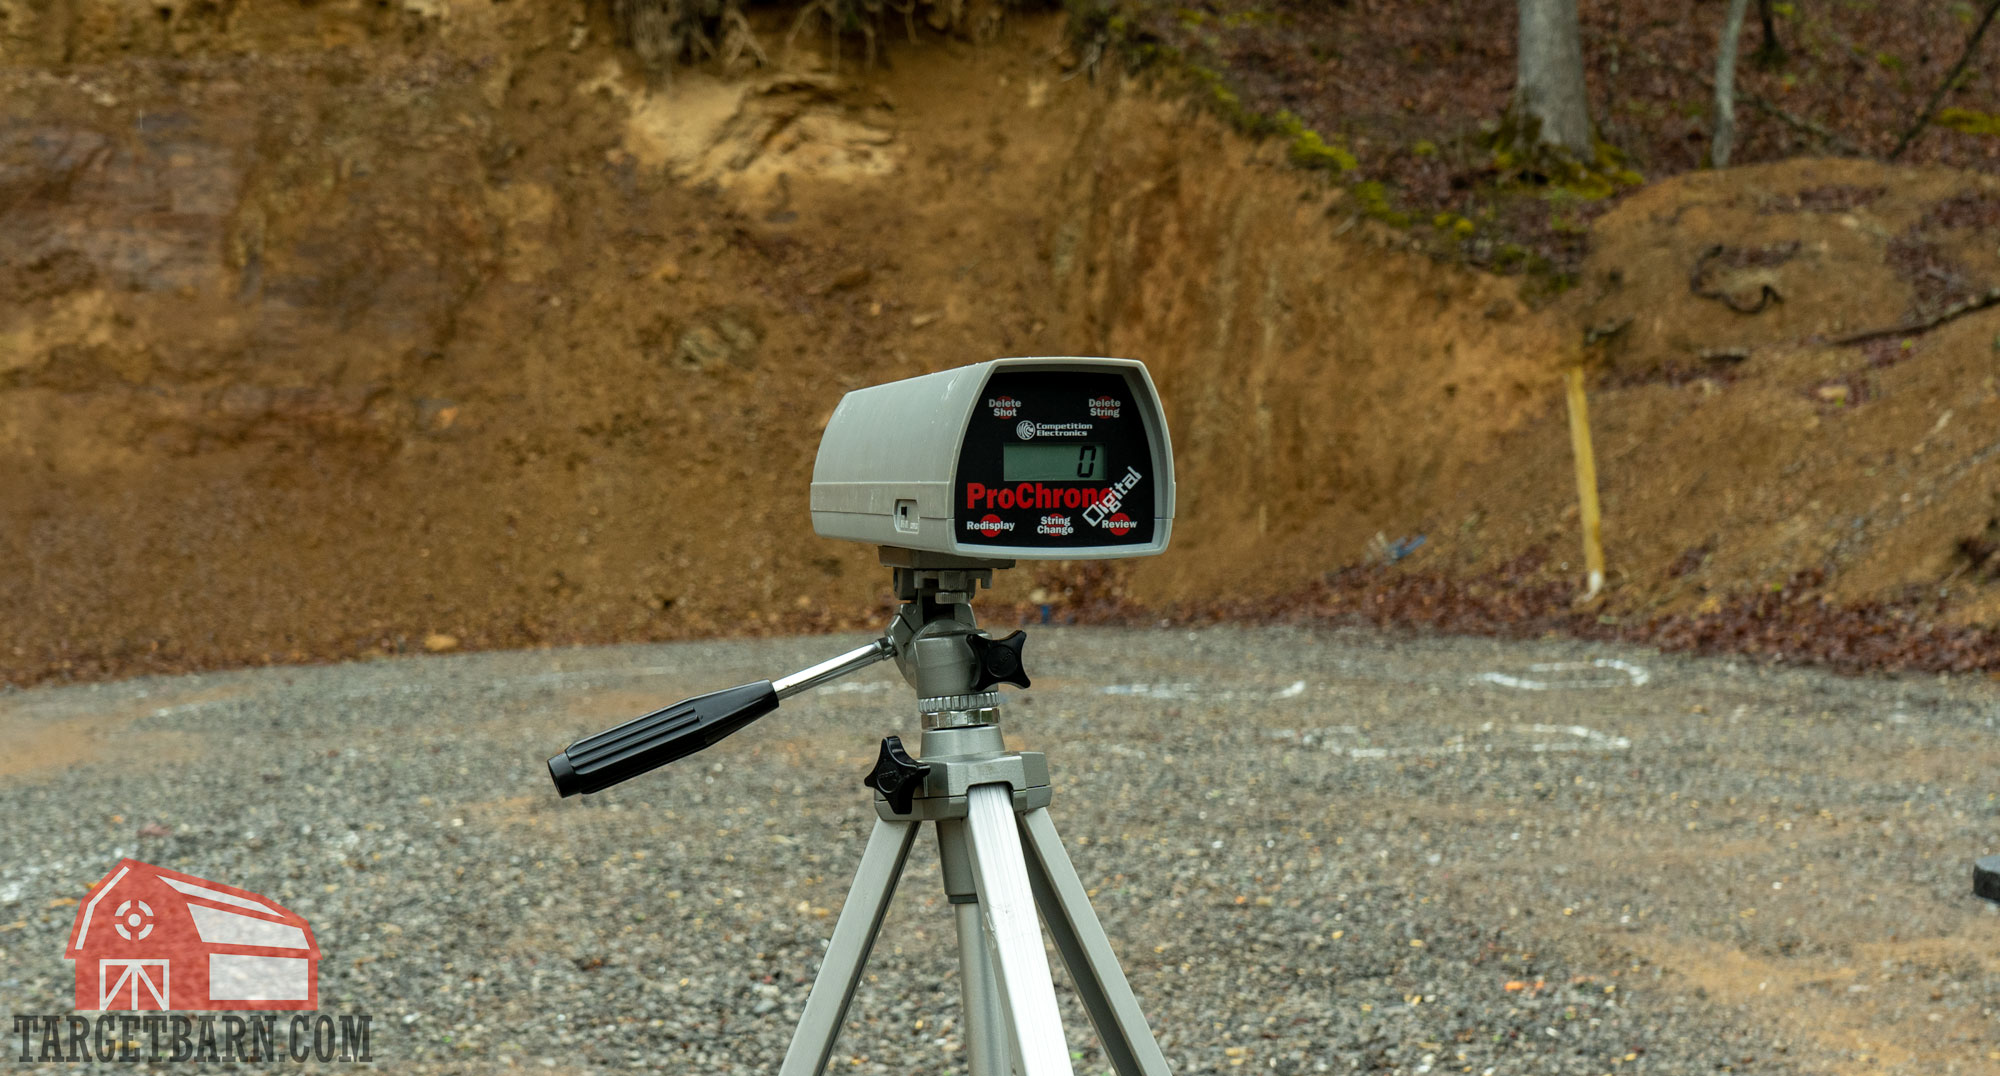 a chronograph at the range to test velocities for the hornady critical defense .380 review